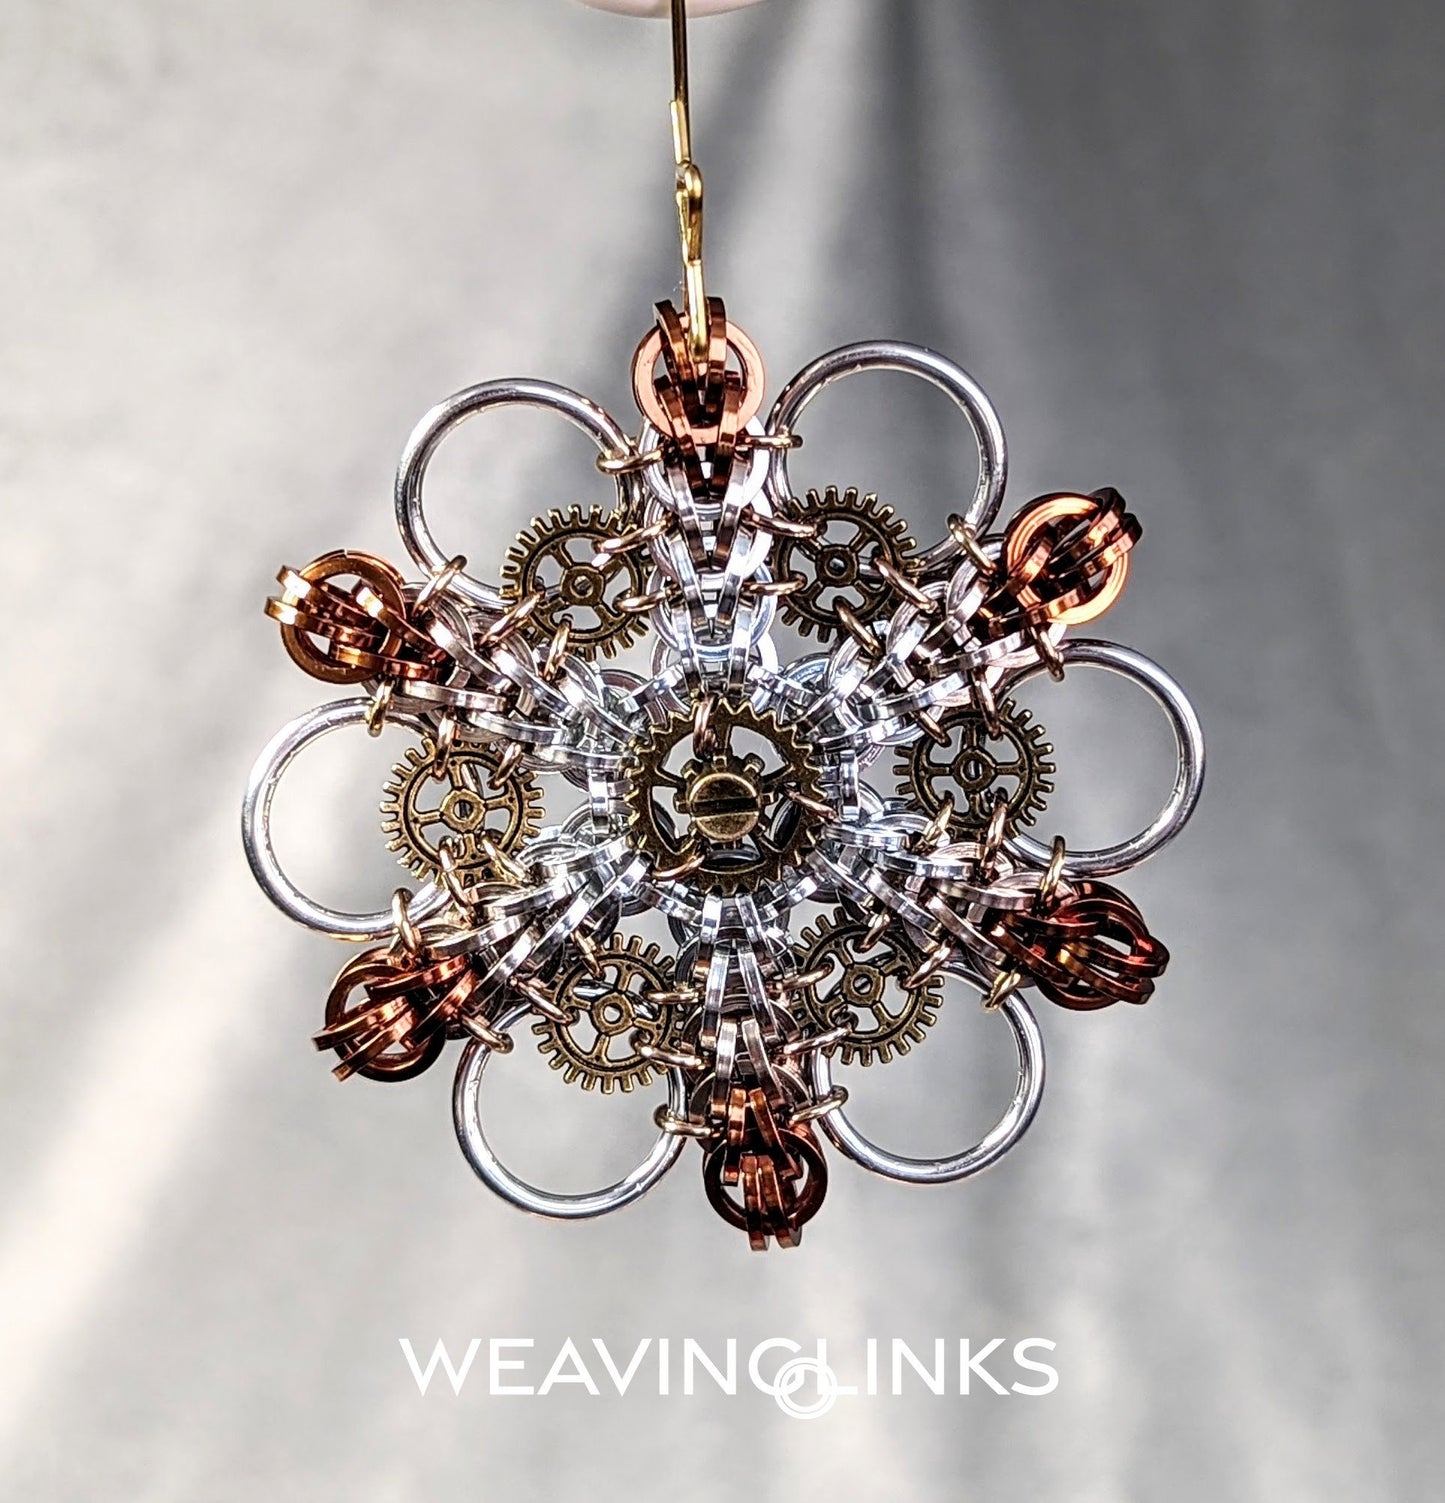 Instructions for Large Steampunk Snowflake Ornament